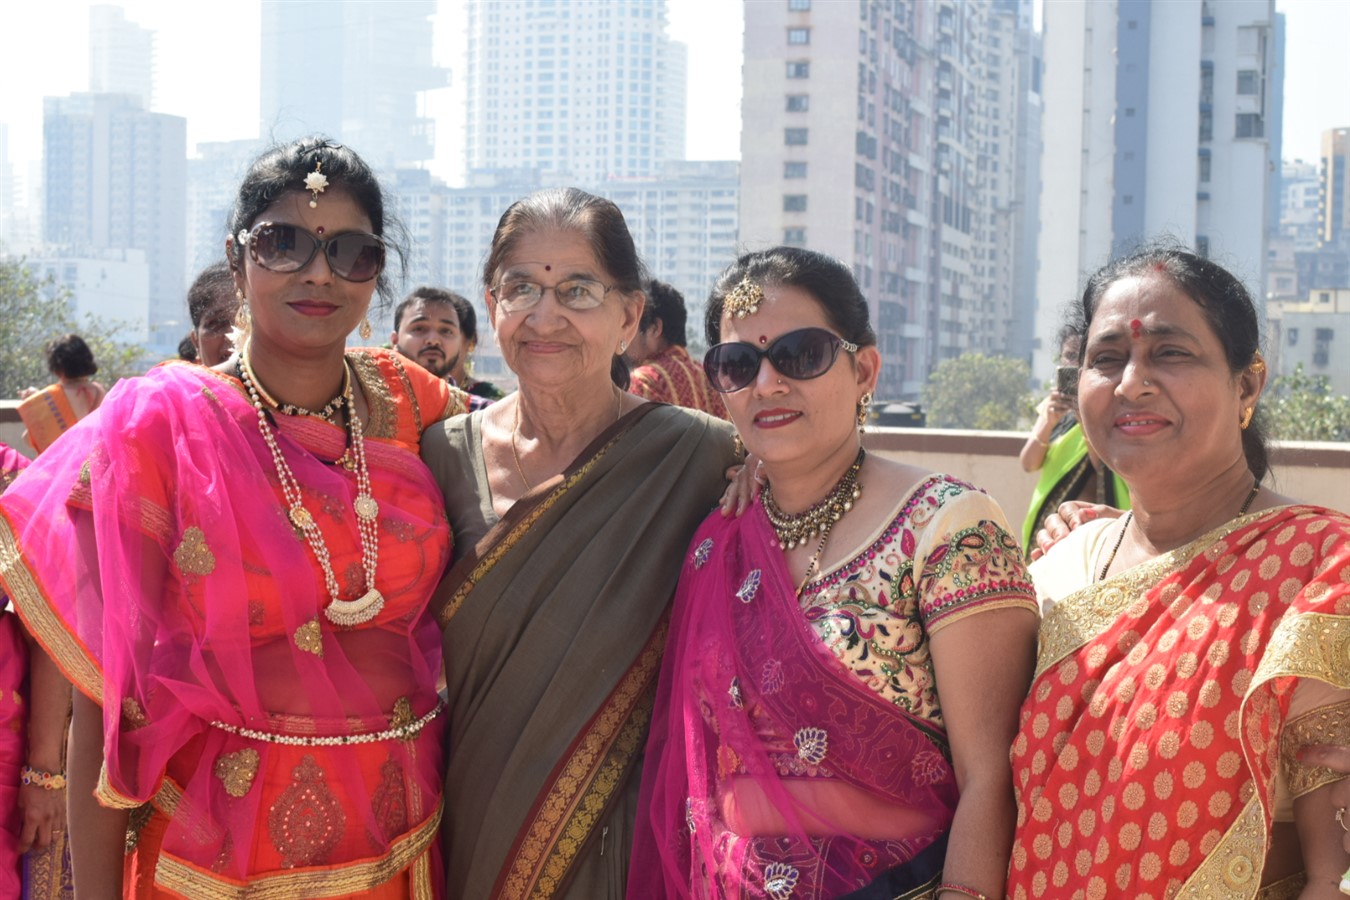 Prabha Parikh ( Tailoring teacher)  with a few beneficiaries on the terrace during a kite flying event